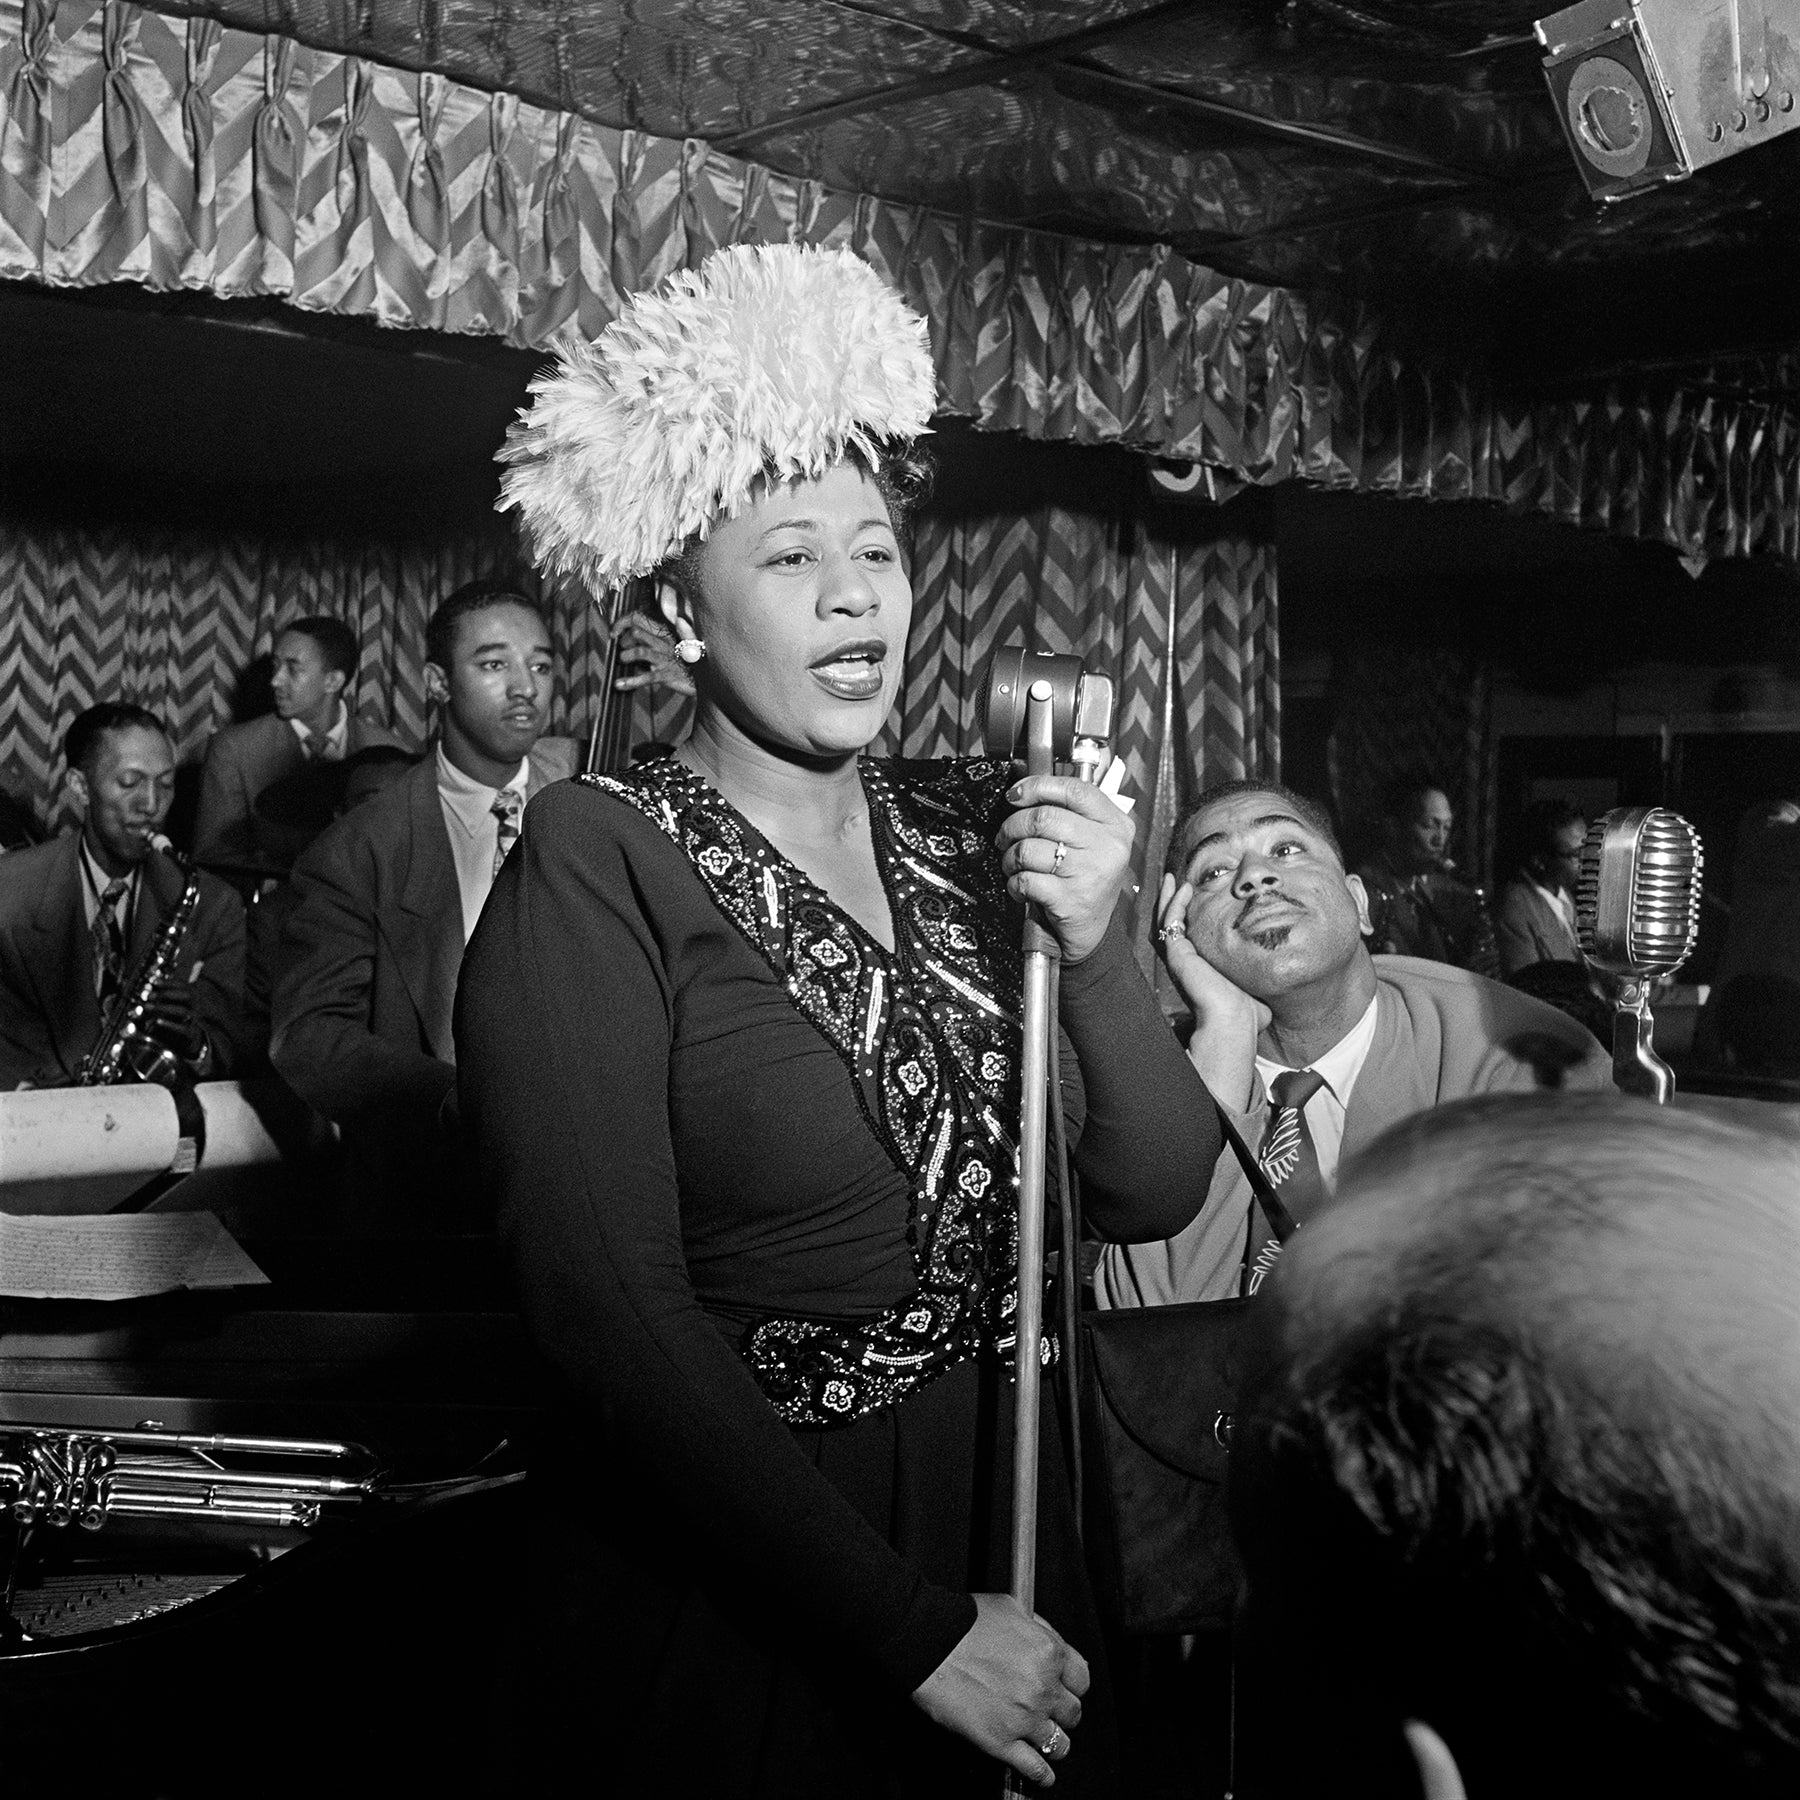 A vintage, black and white photograph of Ella Fitzgerald performing